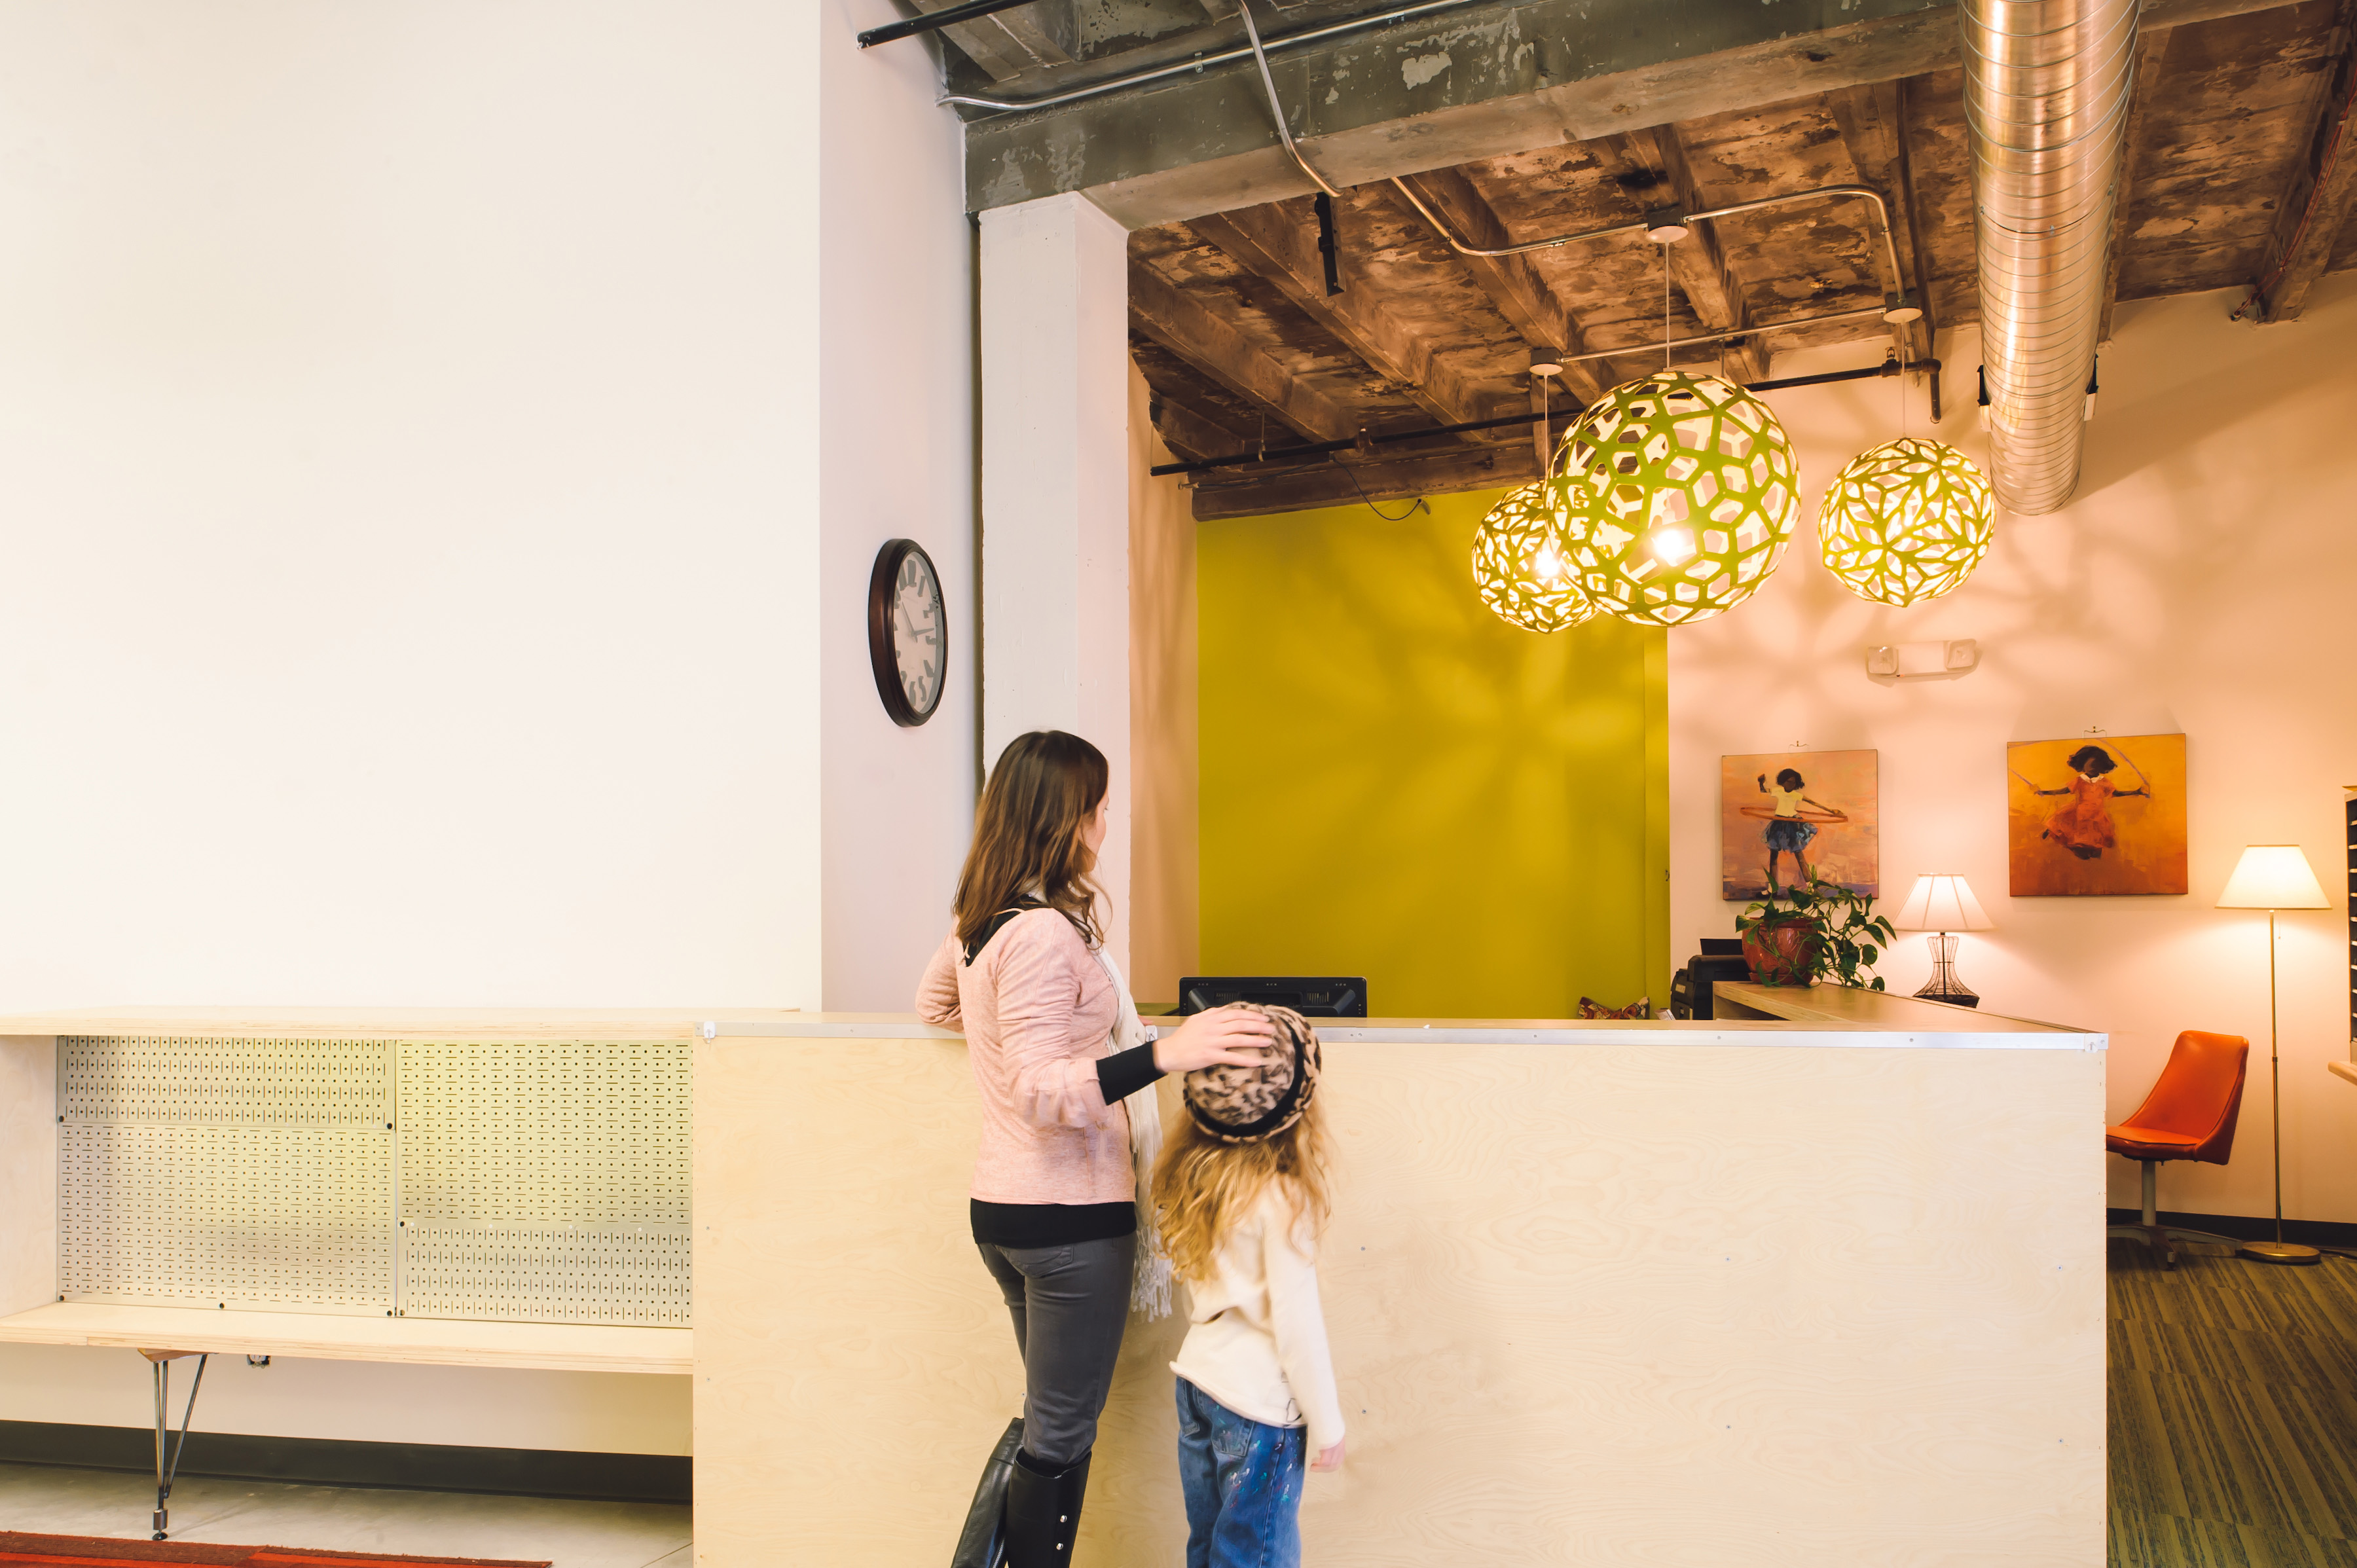 school reception, modern ceiling lights, woman with young girl, orange chair